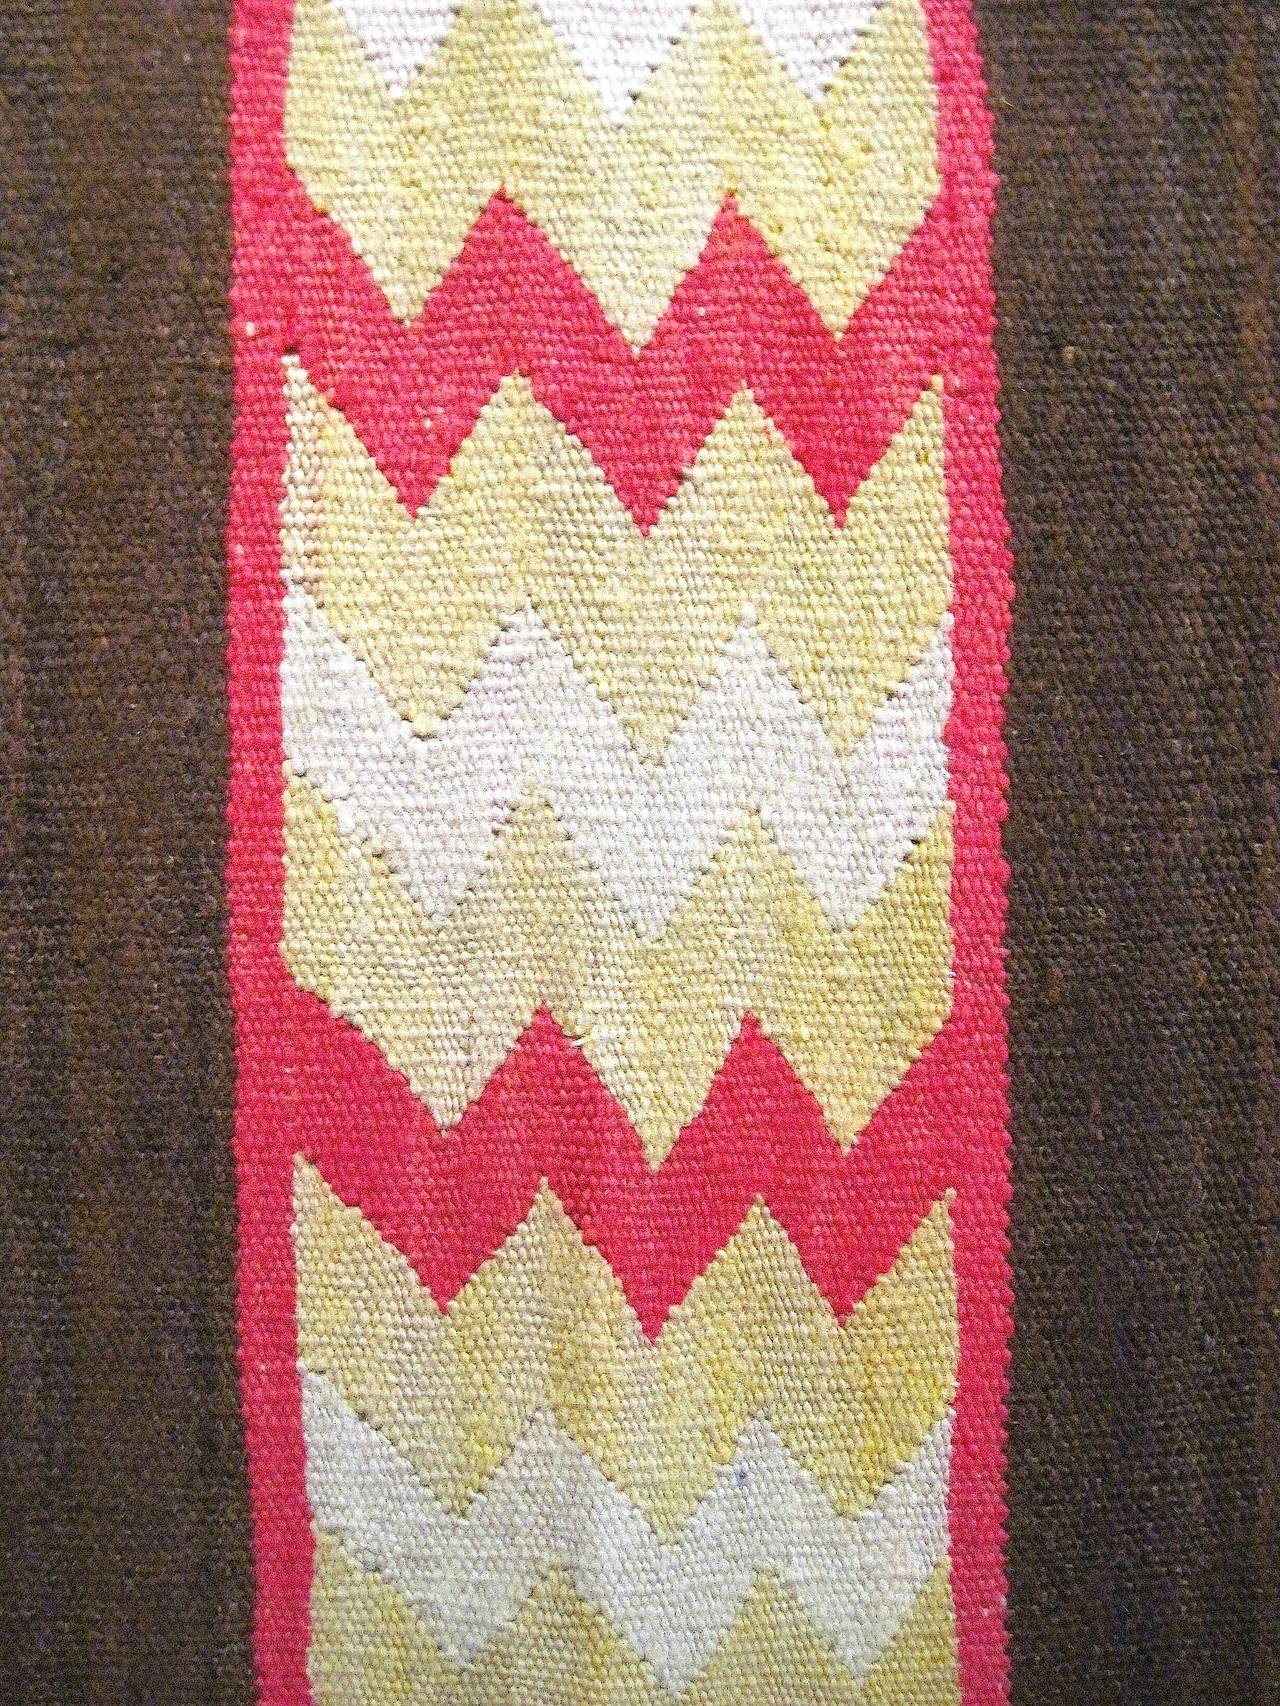 This intensely graphic and colorful small Navajo weaving has been described as a child's wearing blanket; although it’s exact purpose may be up for discussion. Whatever its intended use might have been originally, today it can be appreciated for its